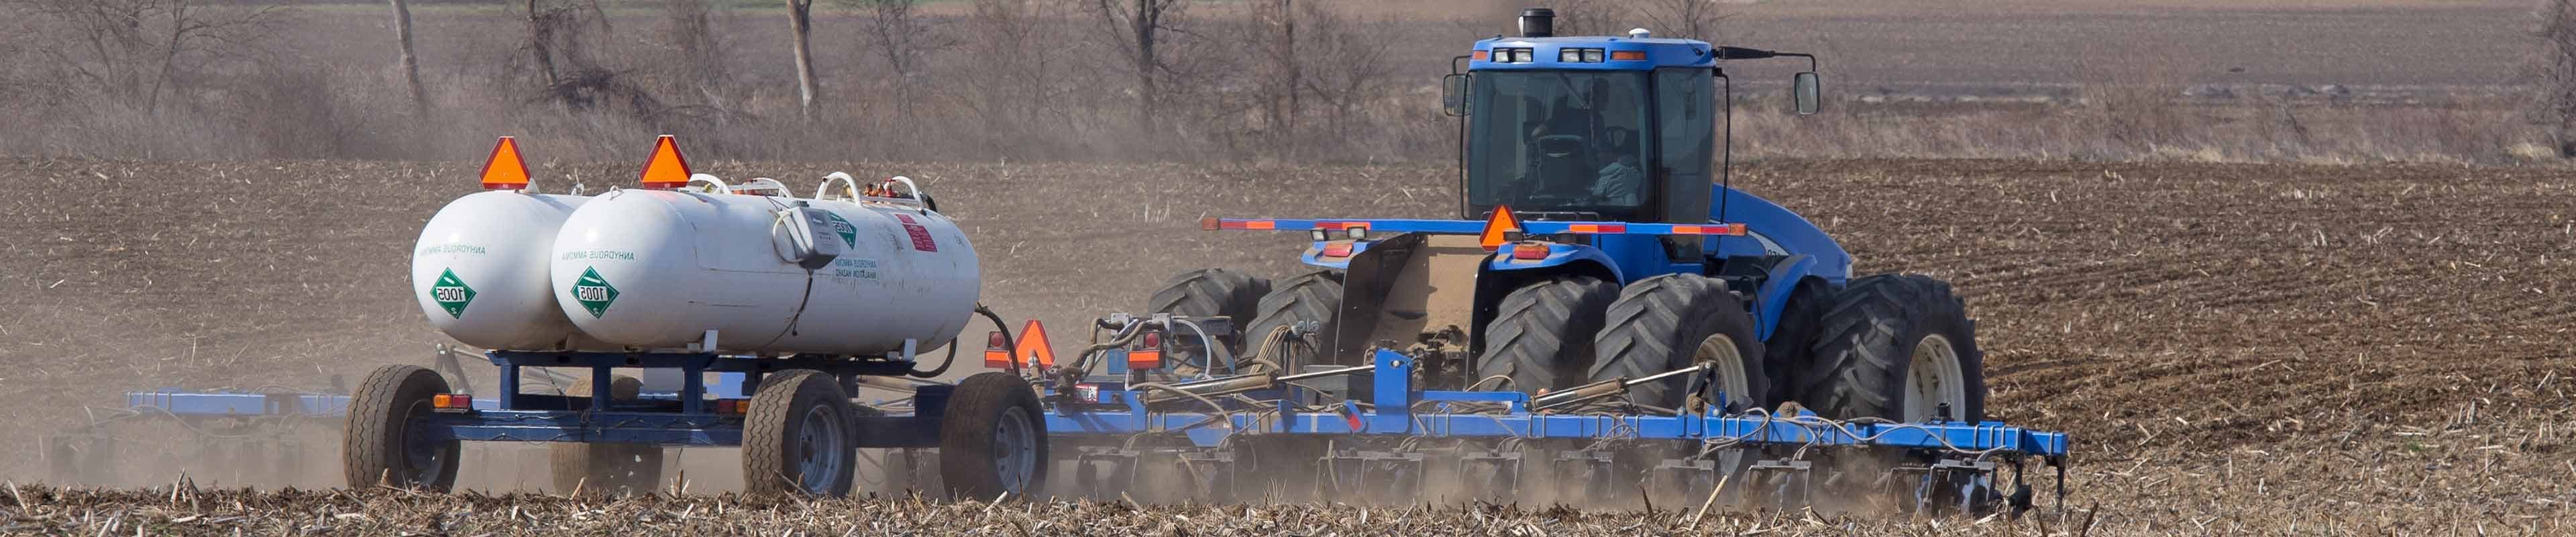 Image of a tractor spraying anhydrous ammonia (NH3) on to a field. 